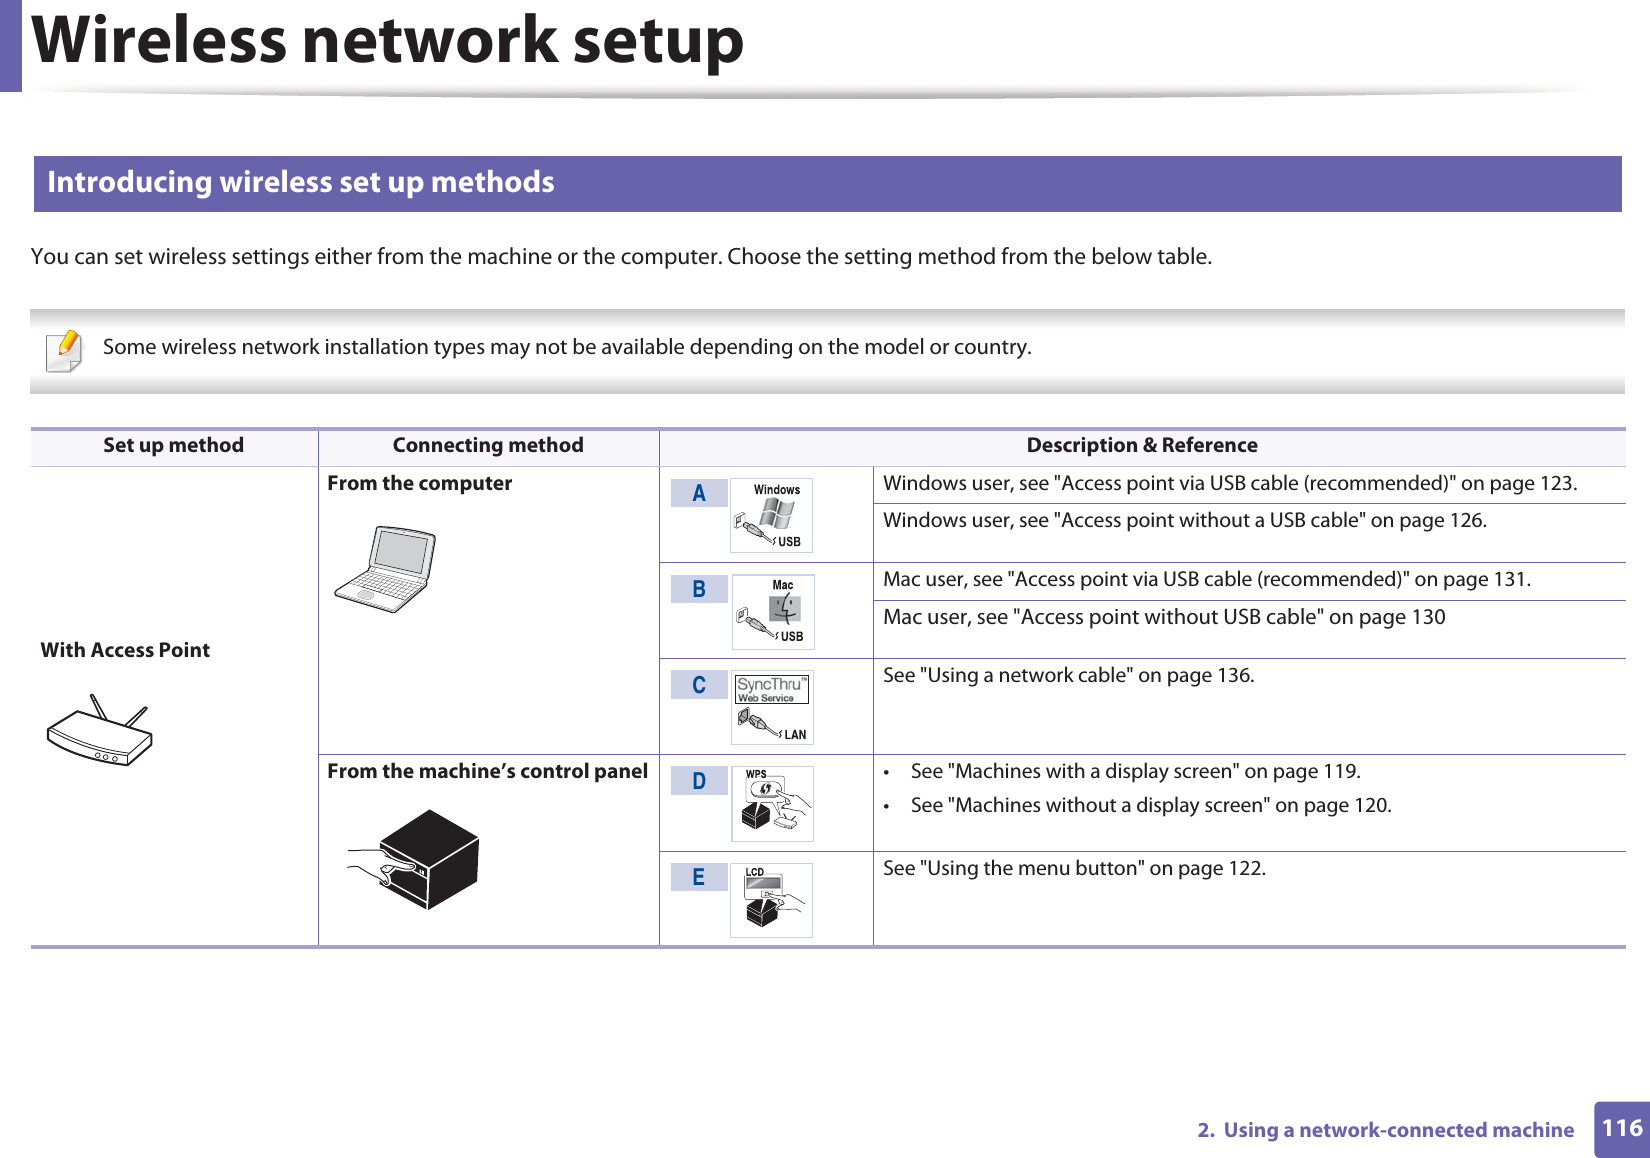 Wireless network setup1162.  Using a network-connected machine12 Introducing wireless set up methodsYou can set wireless settings either from the machine or the computer. Choose the setting method from the below table. Some wireless network installation types may not be available depending on the model or country.  Set up method Connecting method Description &amp; ReferenceWith Access PointFrom the computer Windows user, see &quot;Access point via USB cable (recommended)&quot; on page 123.Windows user, see &quot;Access point without a USB cable&quot; on page 126.Mac user, see &quot;Access point via USB cable (recommended)&quot; on page 131.Mac user, see &quot;Access point without USB cable&quot; on page 130See &quot;Using a network cable&quot; on page 136.From the machine’s control panel • See &quot;Machines with a display screen&quot; on page 119.• See &quot;Machines without a display screen&quot; on page 120.See &quot;Using the menu button&quot; on page 122.ABCDE